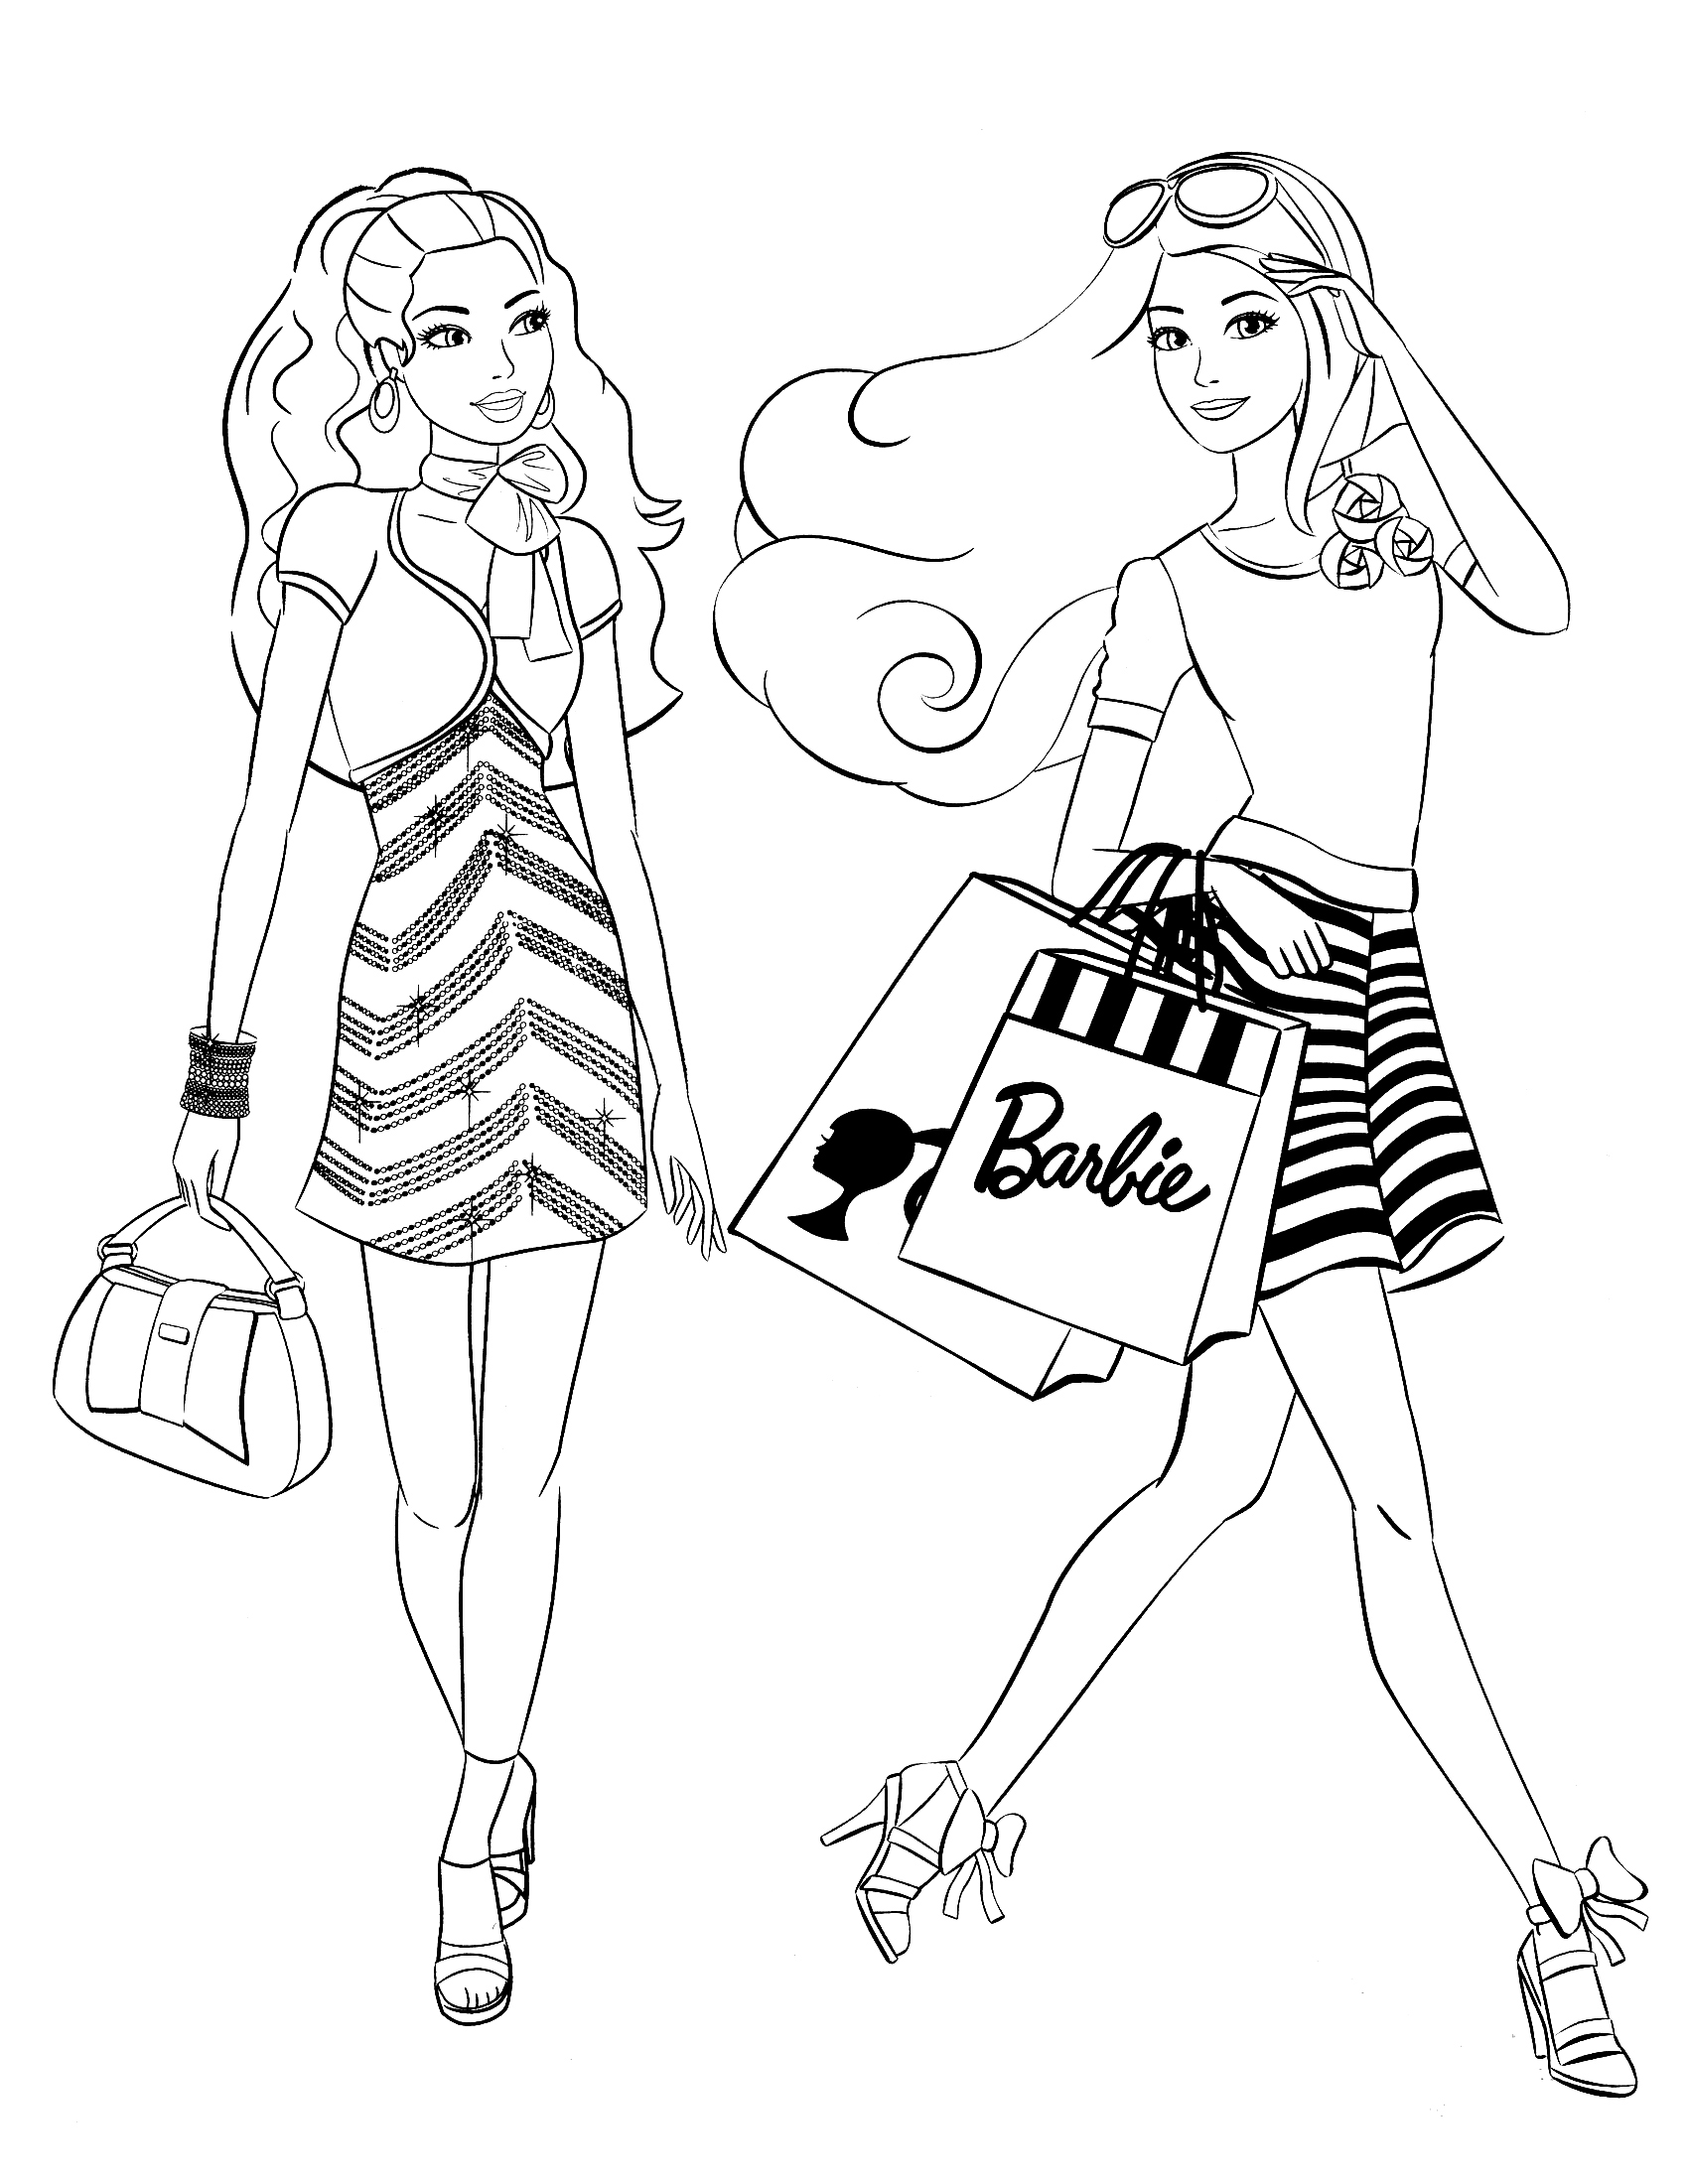 printable coloring pages barbie